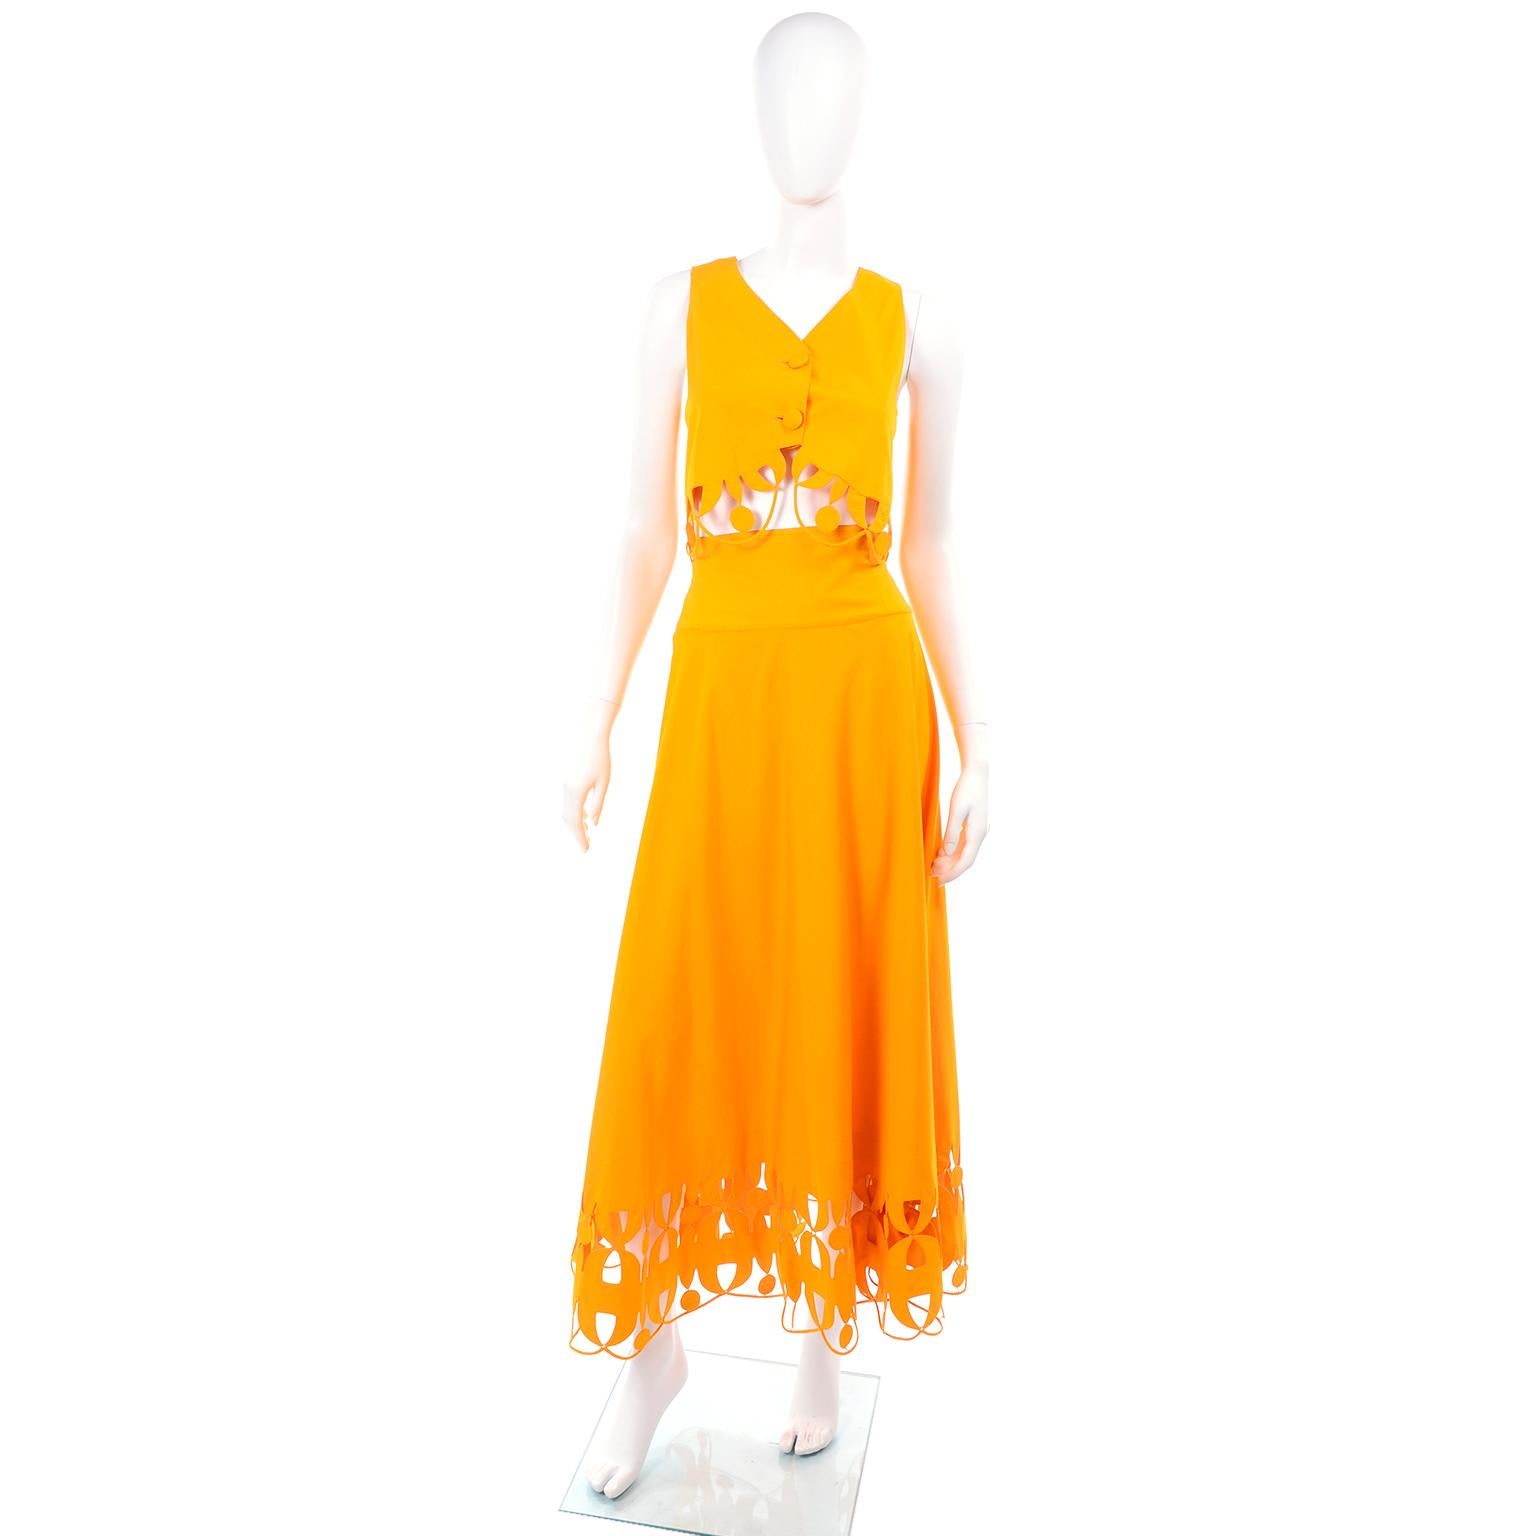 This is a fabulous, rare vintage marigold yellow cotton ensemble designed by Italian designer, Maurizio Glanate in the 1990's. This vintage outfit can be worn casually or at a more formal event depending on the accessories you choose to wear with